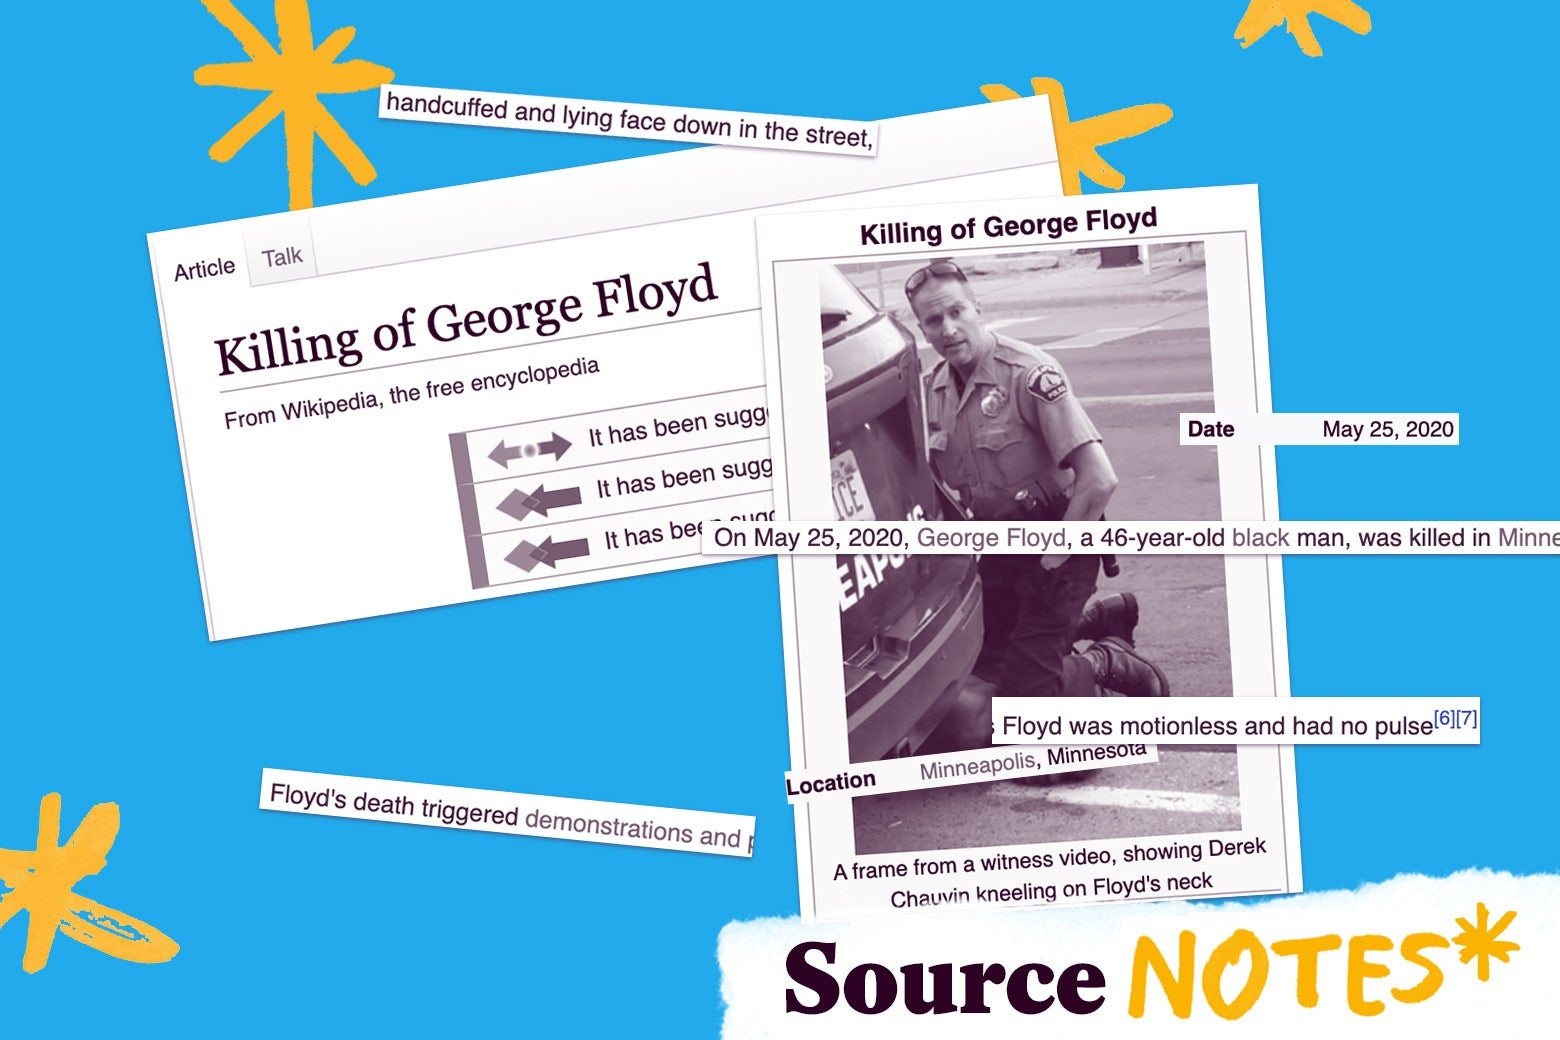 A collage of images from the Wikipedia page for George Floyd, with a logo that says "Source Notes"